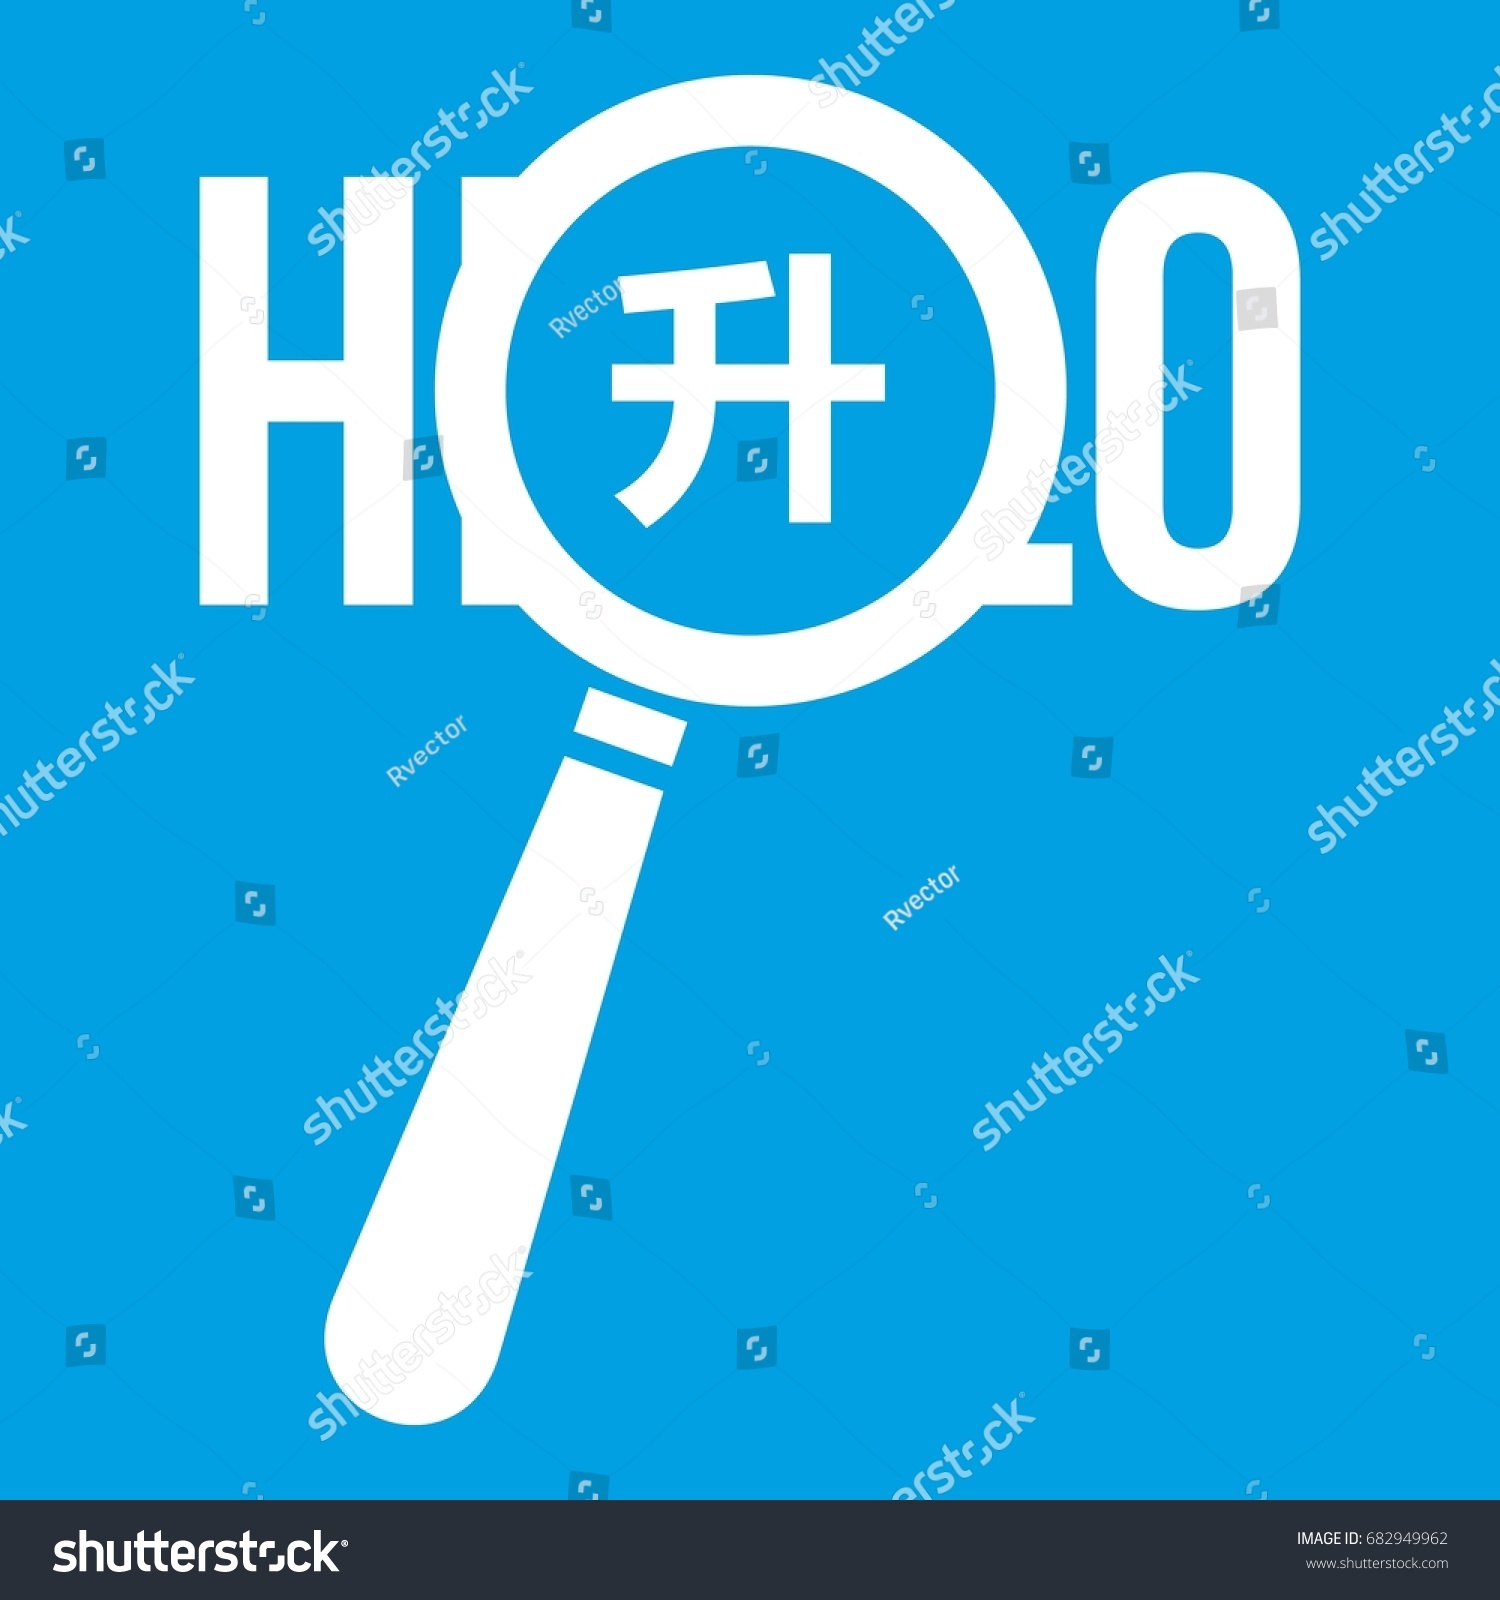 Top Hat Vector Illustration Word Icon Stock Vector 671021692 